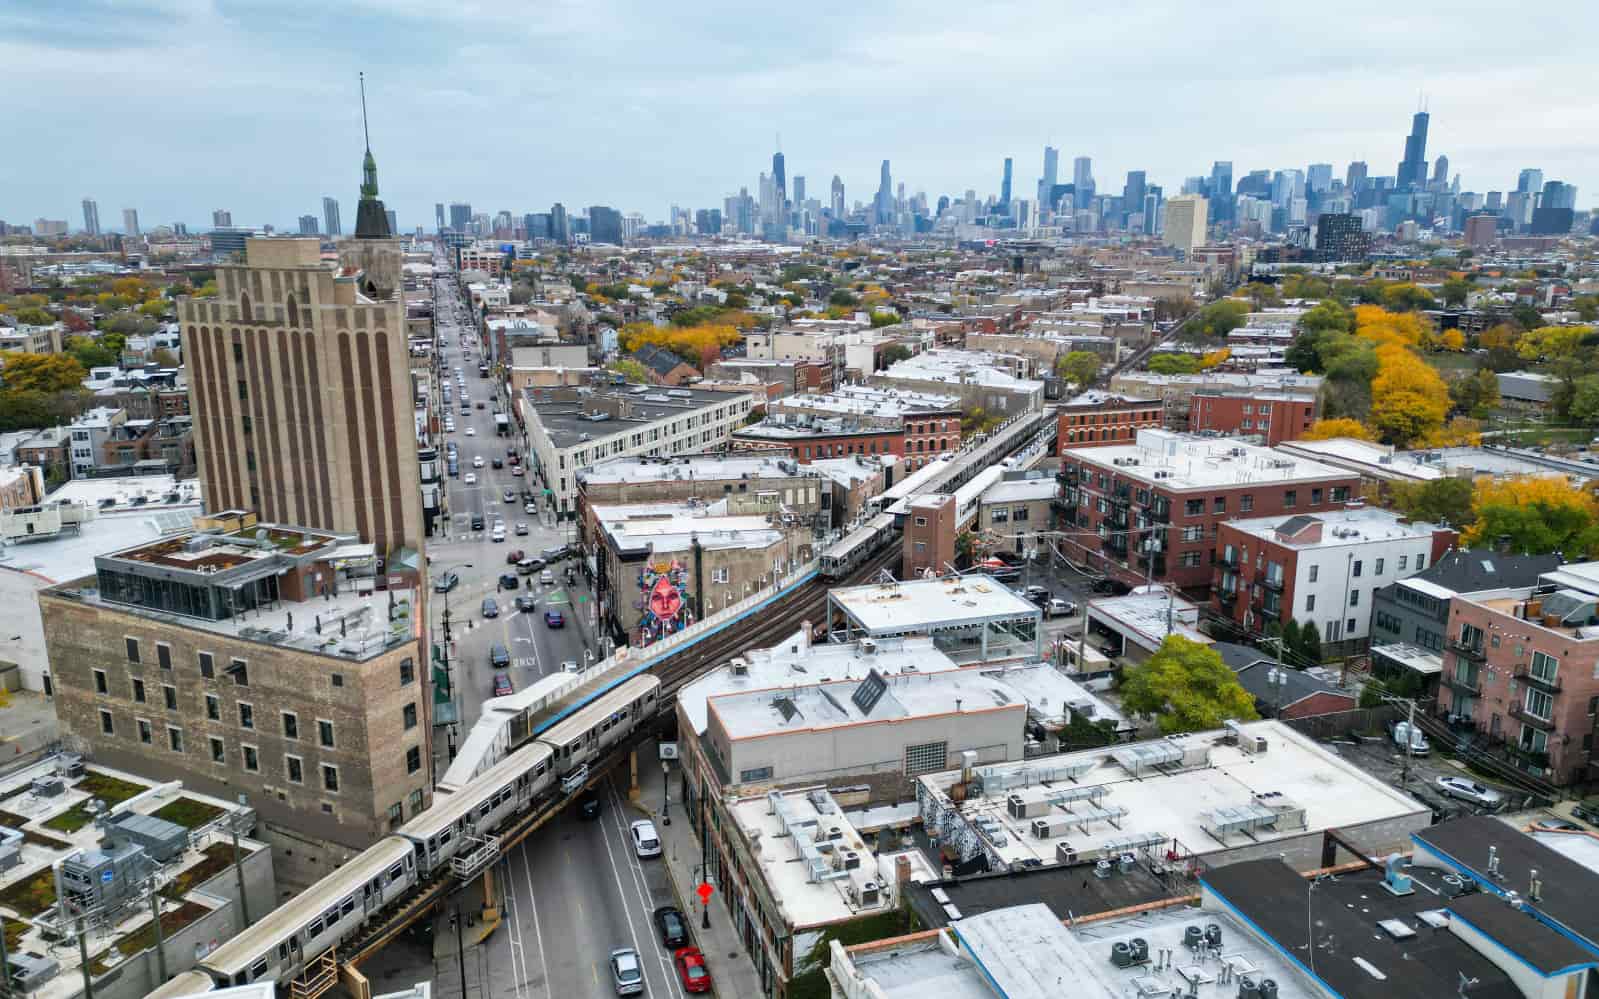 Overhead view of busy intersection in Wicker Park, with CTA L trains crossing and downtown Chicago skyline in the background